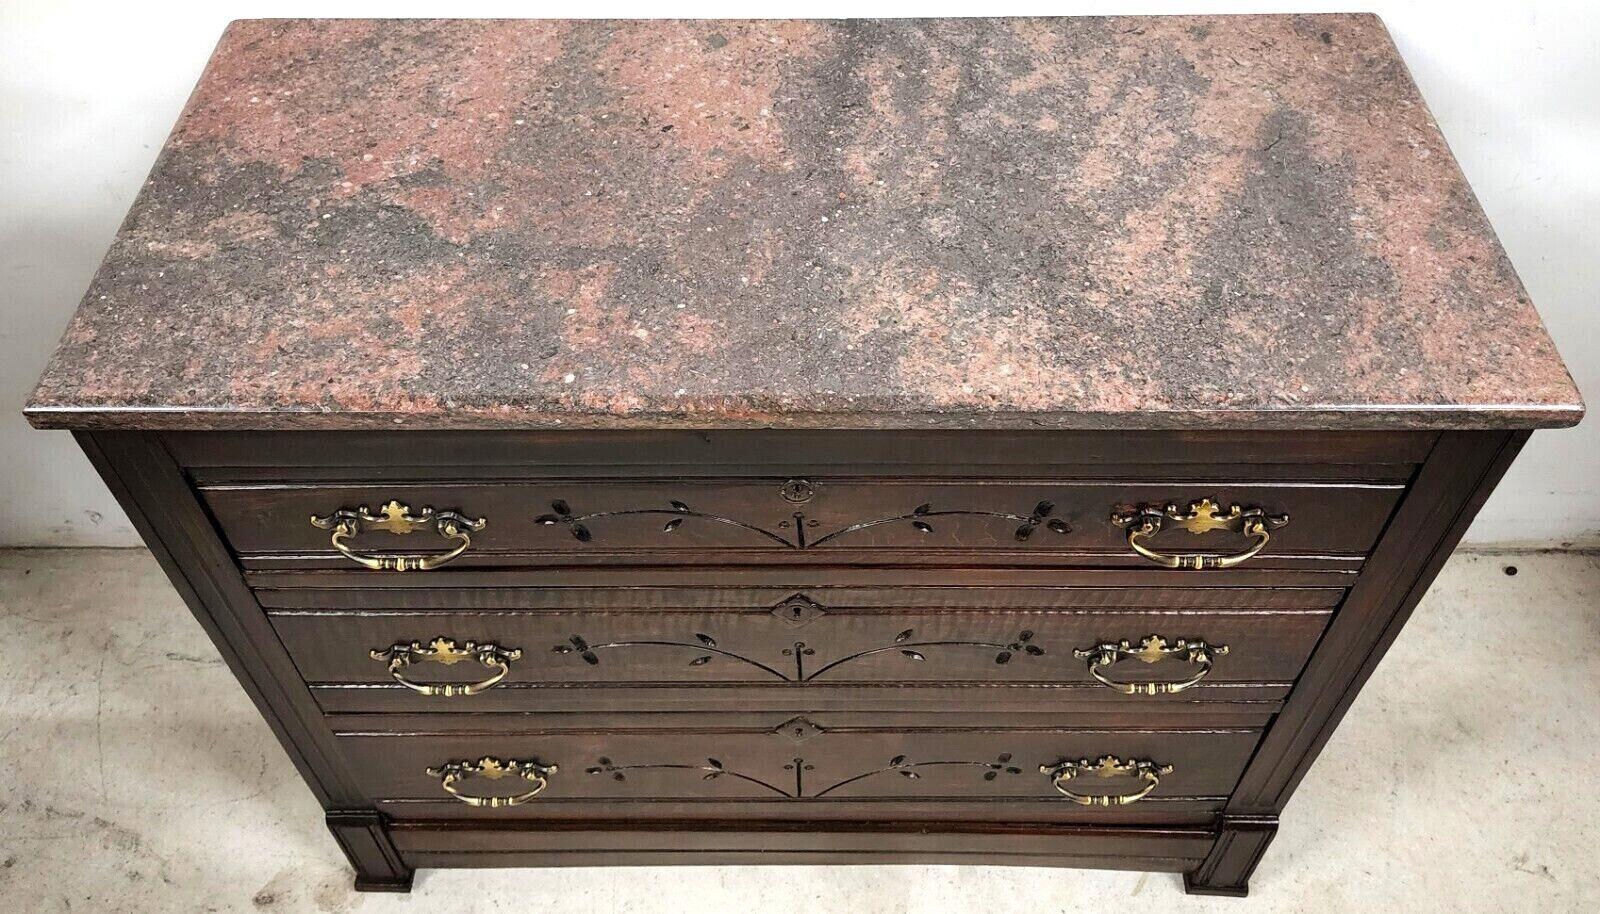 Offering One Of Our Recent Palm Beach Estate Fine Furniture Acquisitions Of An 
Antique 1800s French Country Granite Top Chest Of Drawers Dresser Nightstand

Approximate Measurements in Inches
31